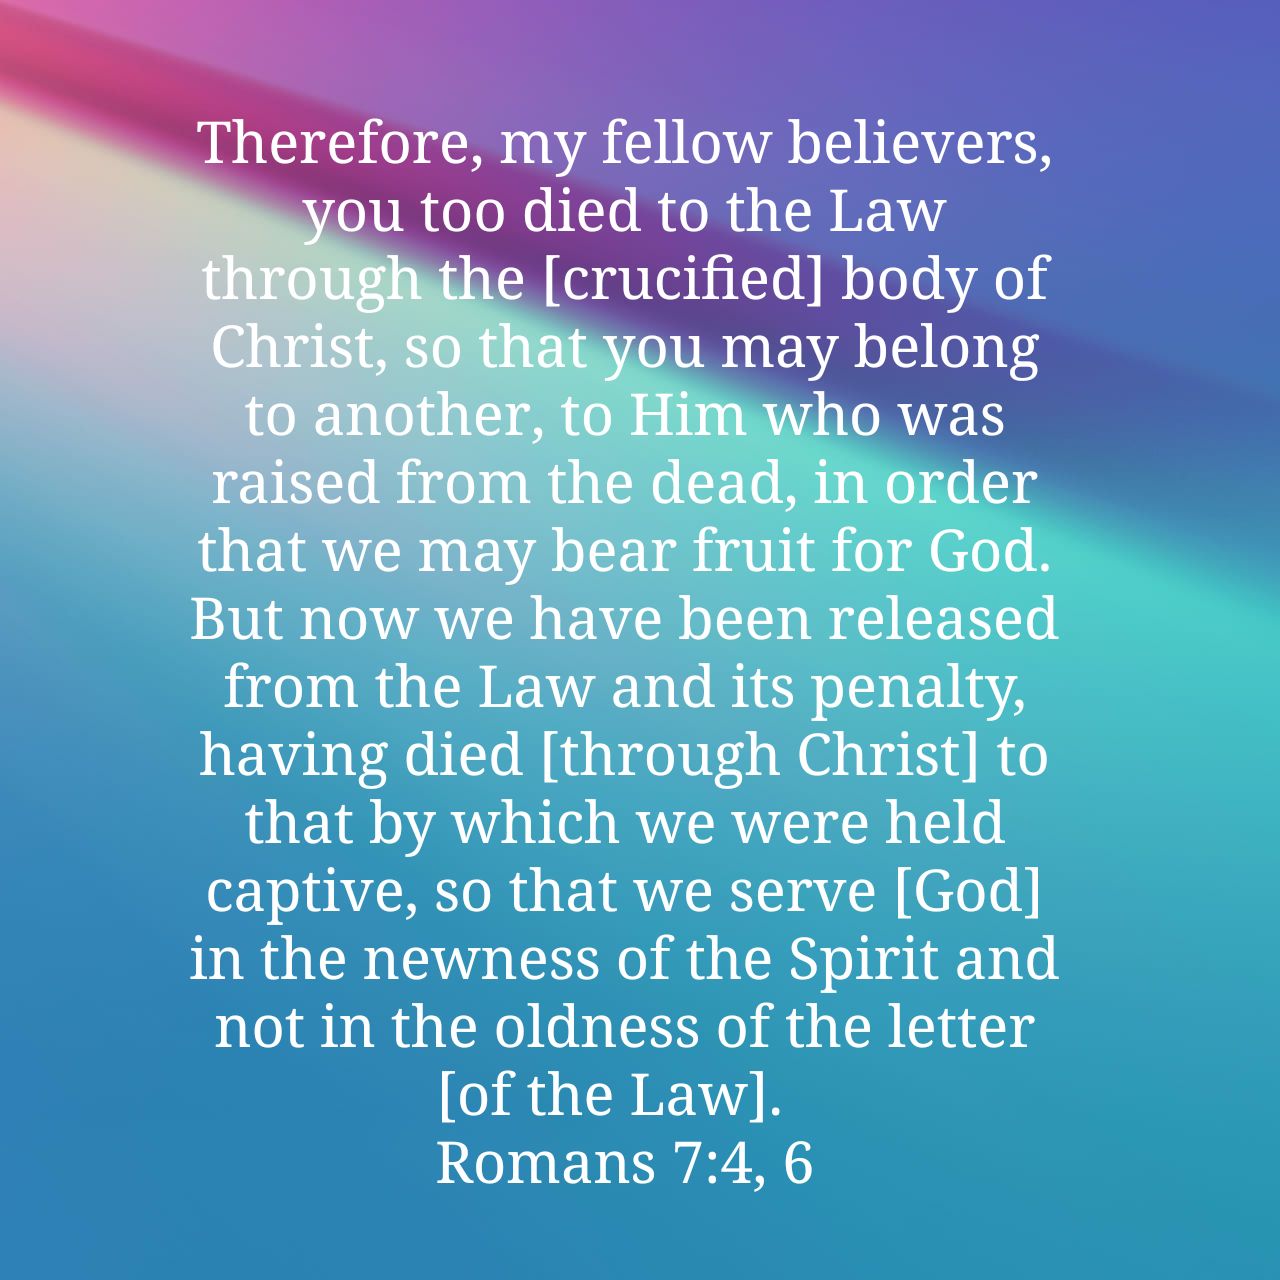 Scripture reference : IN the Newness of the Spirit